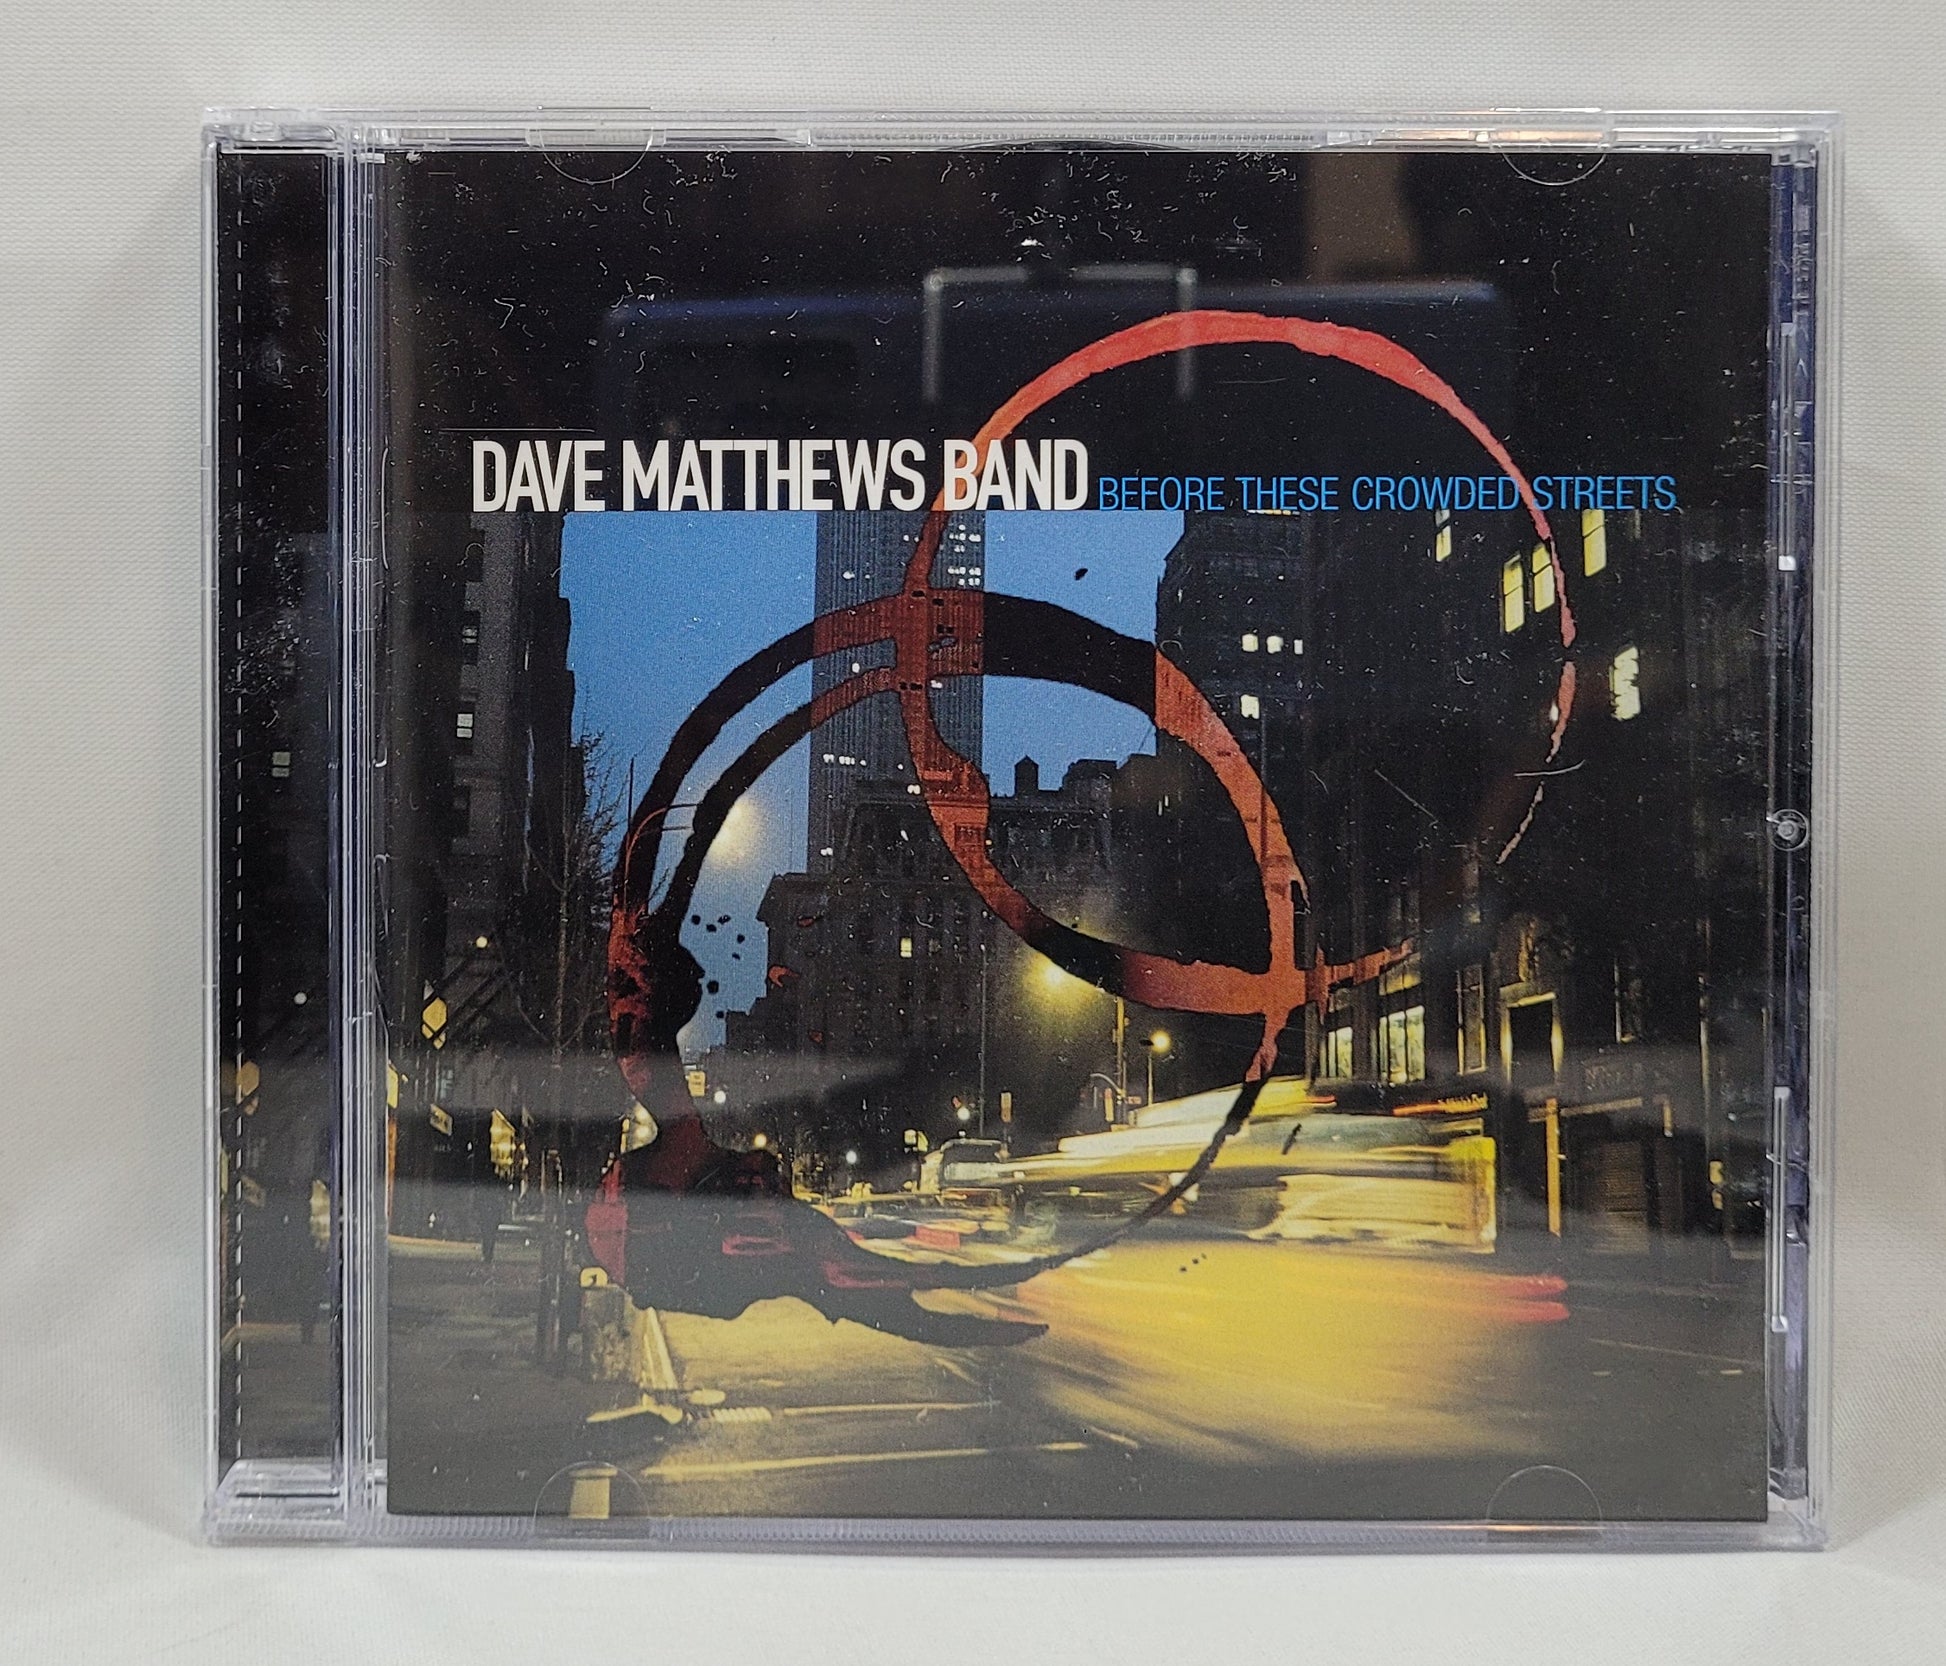 Dave Matthews Band - Before These Crowded Streets [1998 Used CD]